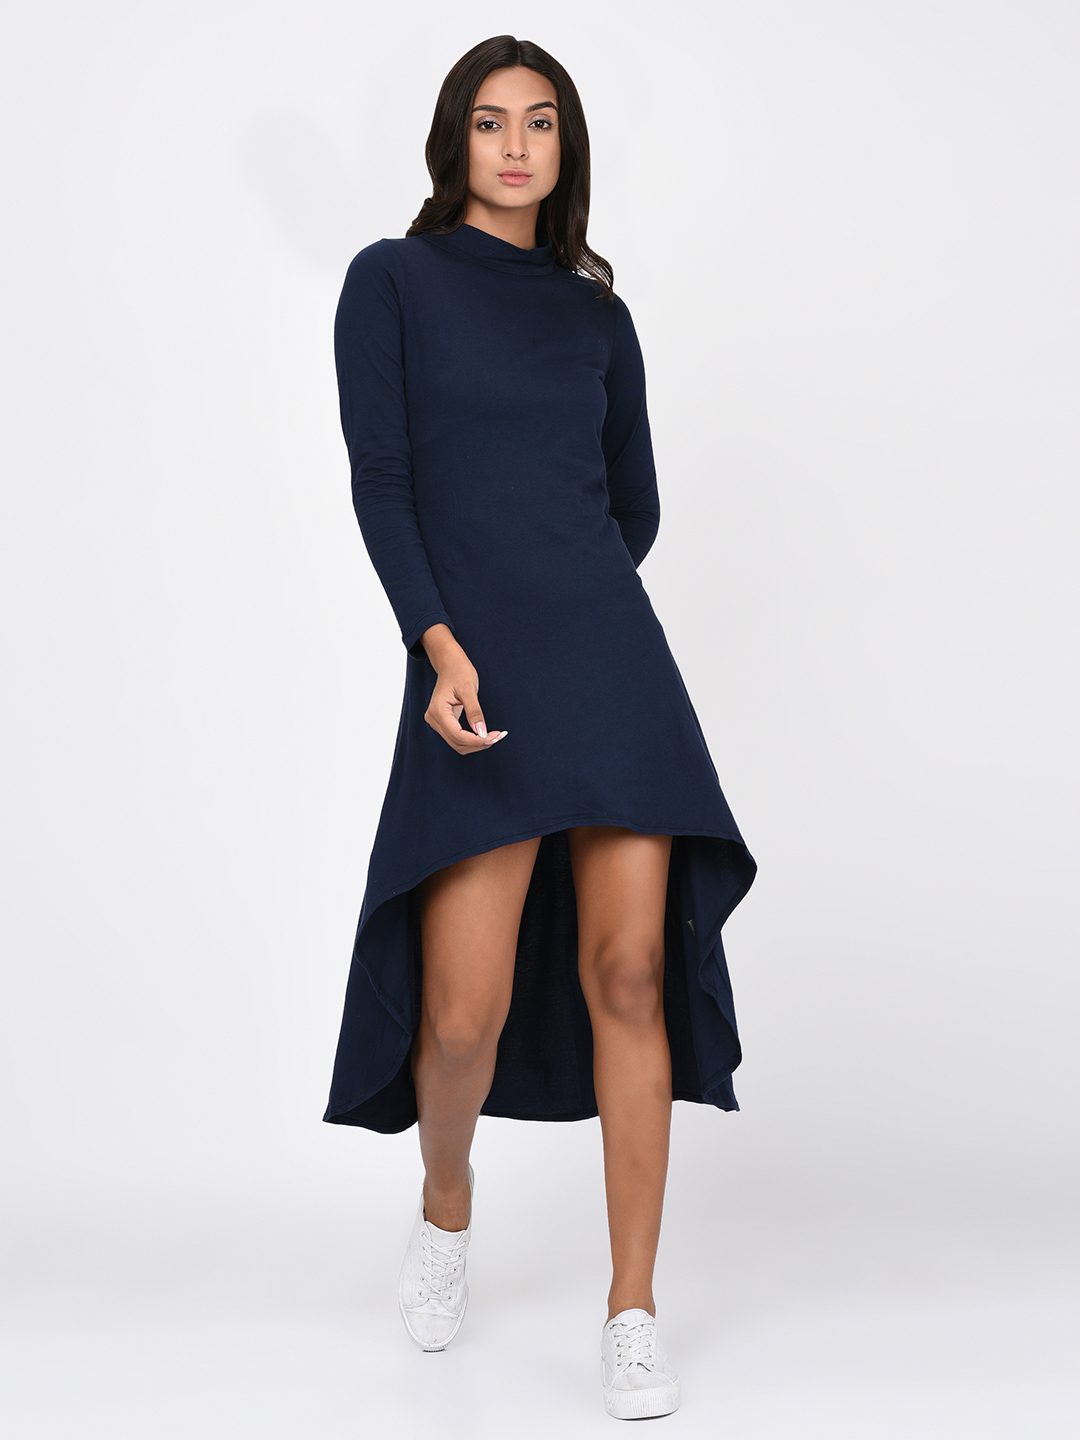 Product image - We offer Womens Dresses in Knitted Cotton, Woven Rayon, Poly Crepe and more. All new trends and colors are used to design the new collections.